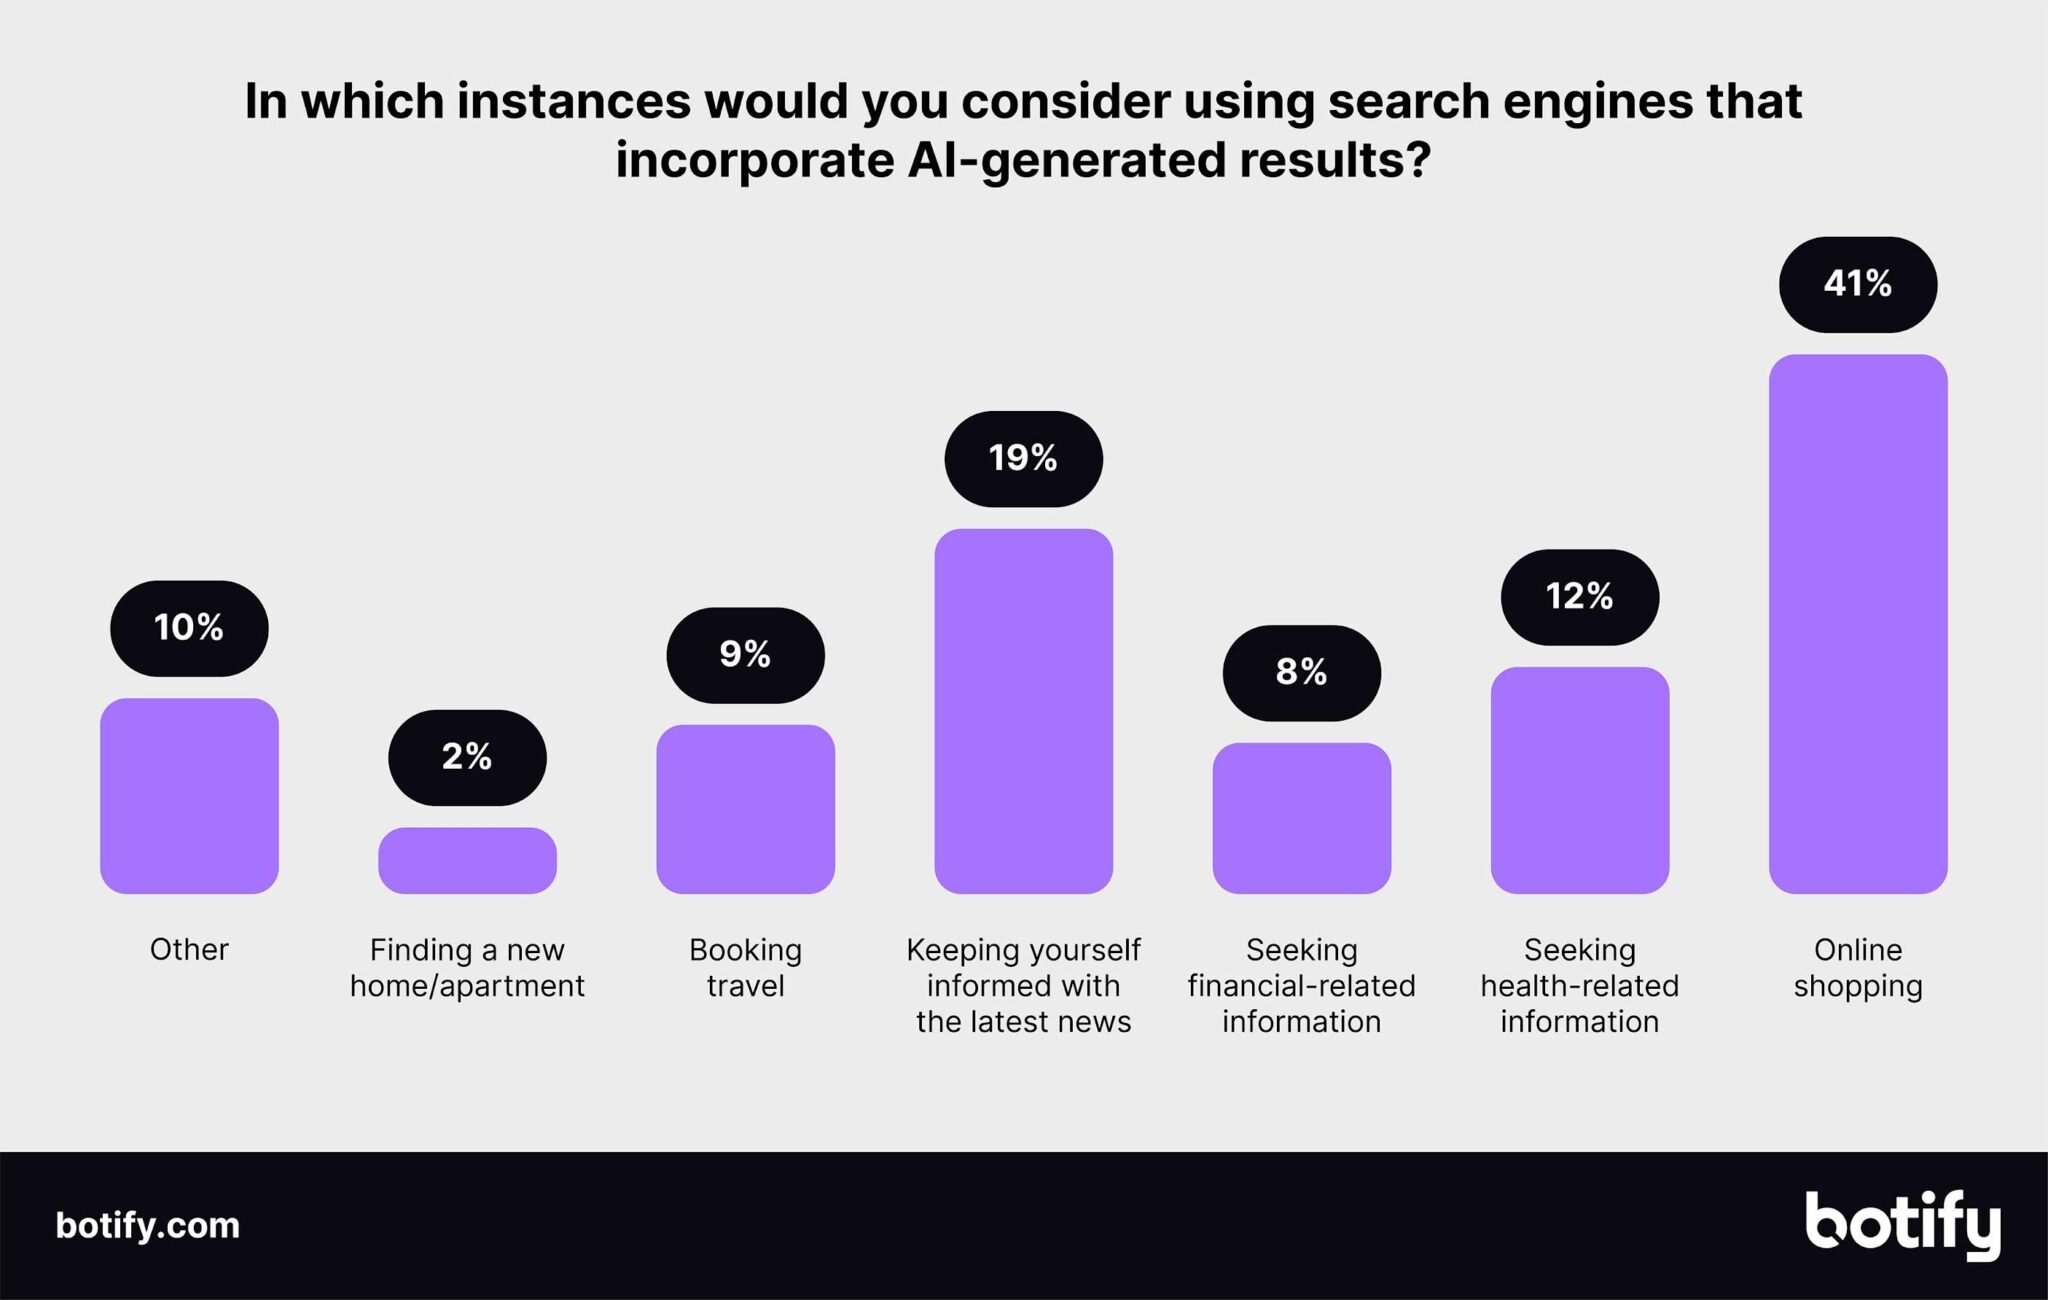 In which instances would you consider using search engines that incorporate AI-generated results?